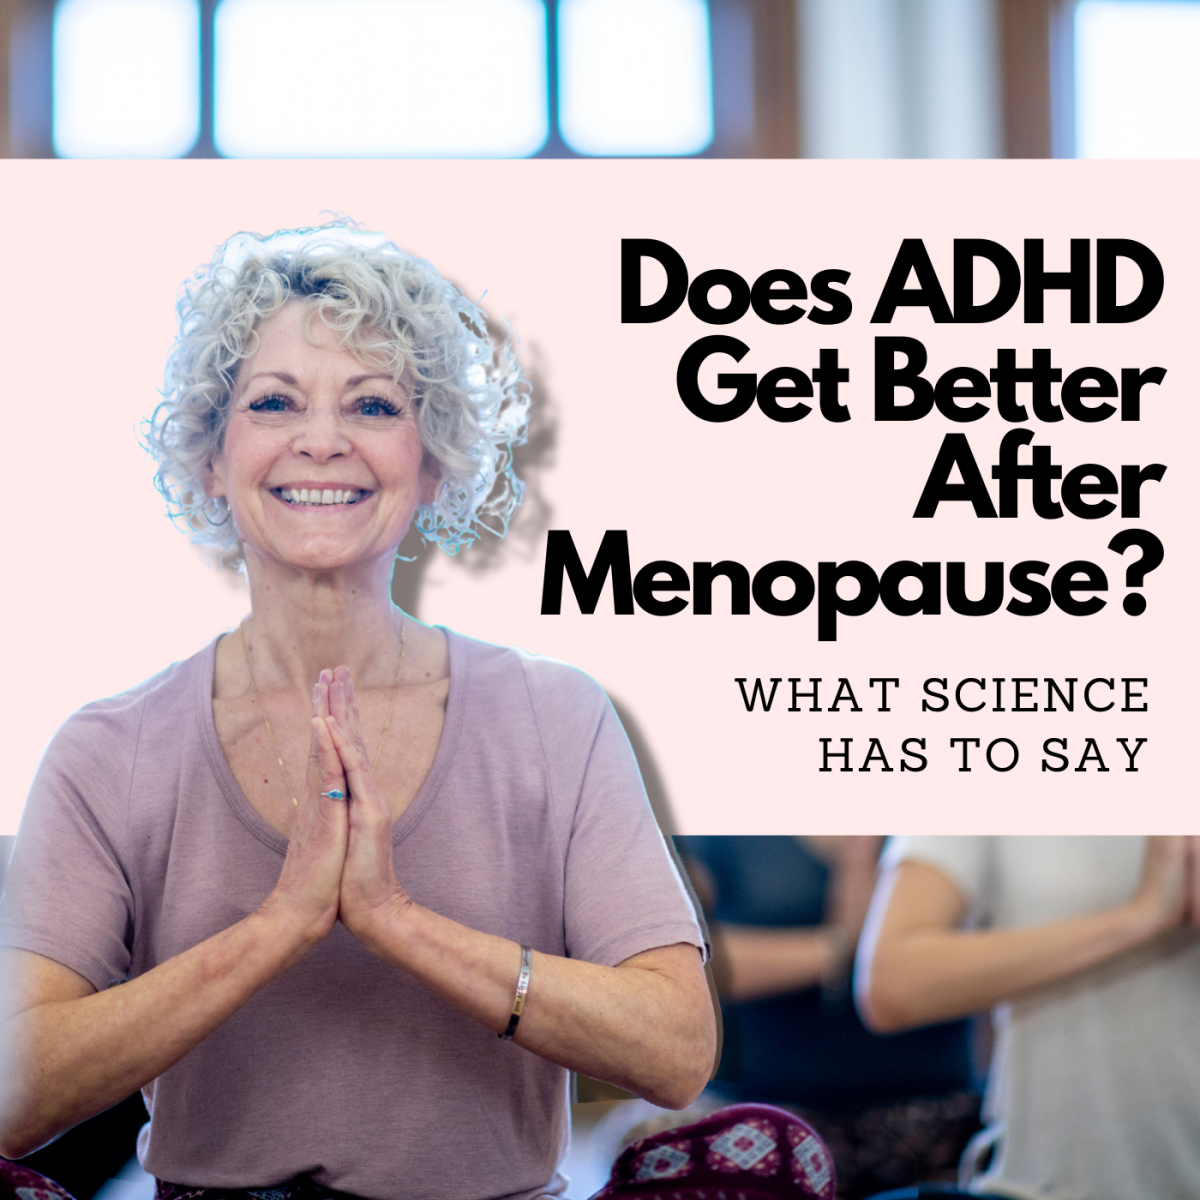 Does ADHD Get Better After Menopause? The Answer May Surprise You!